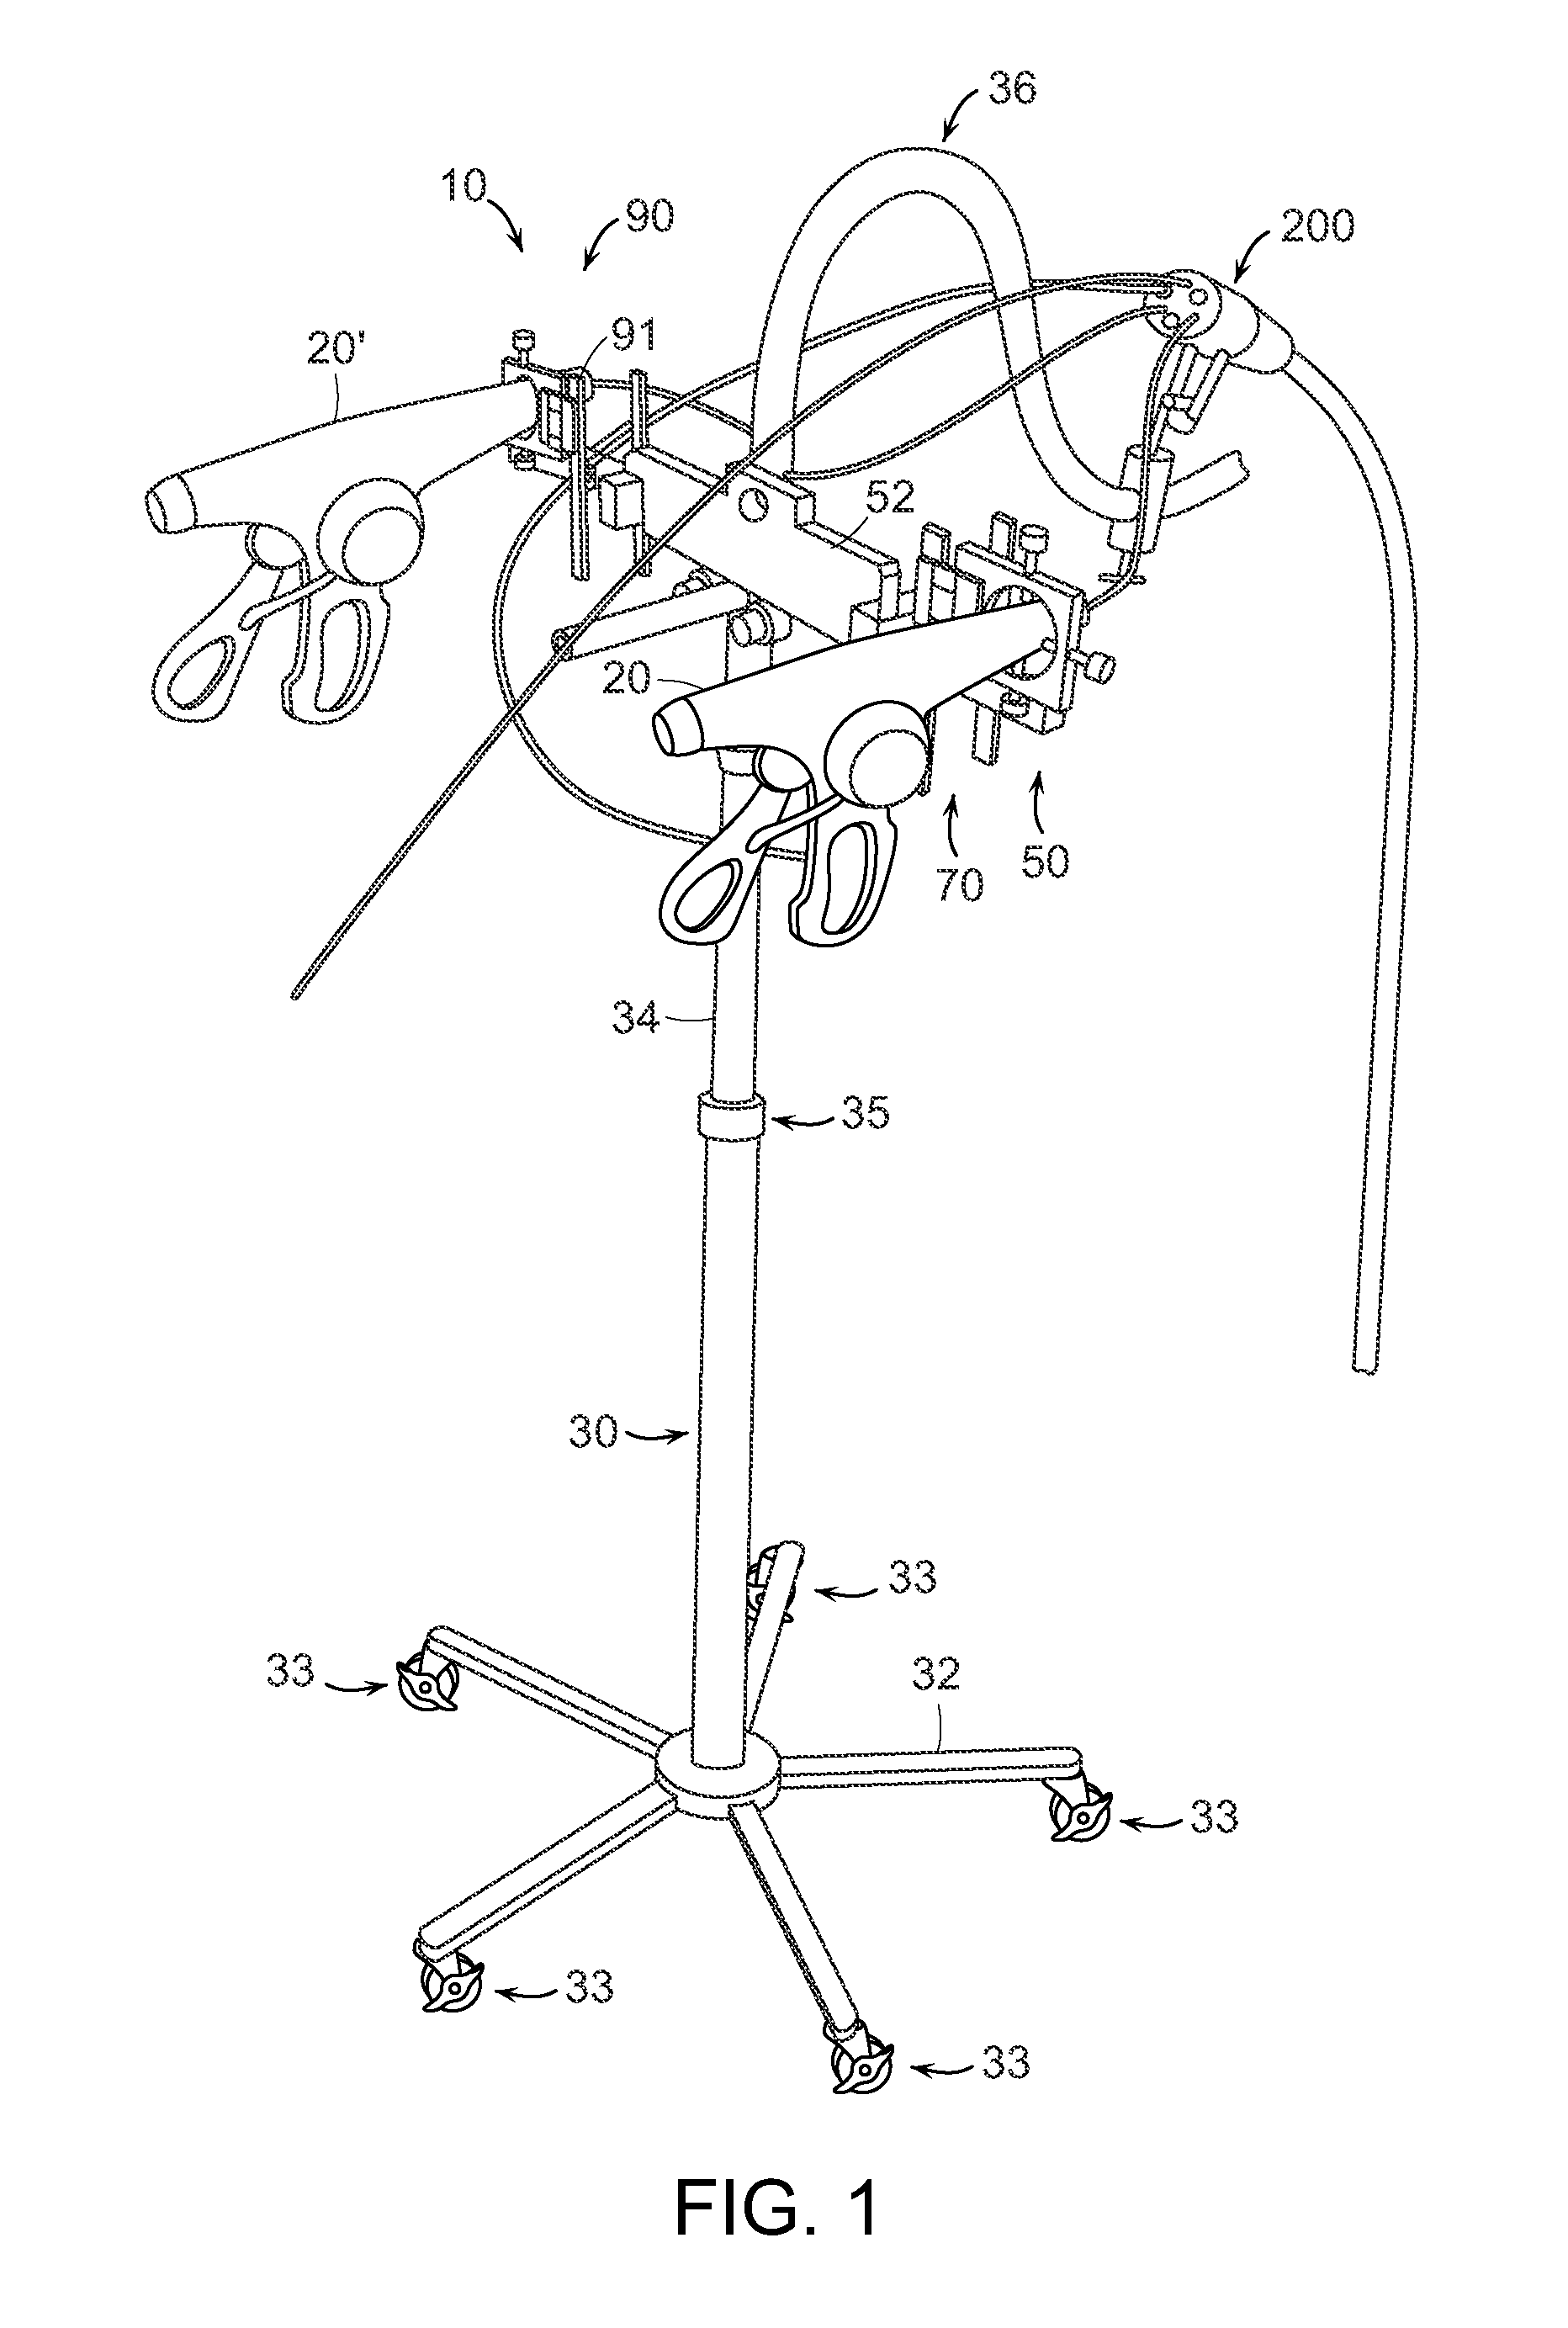 Interface systems for aiding clinicians in controlling and manipulating at least one endoscopic surgical instrument and a cable controlled guide tube system